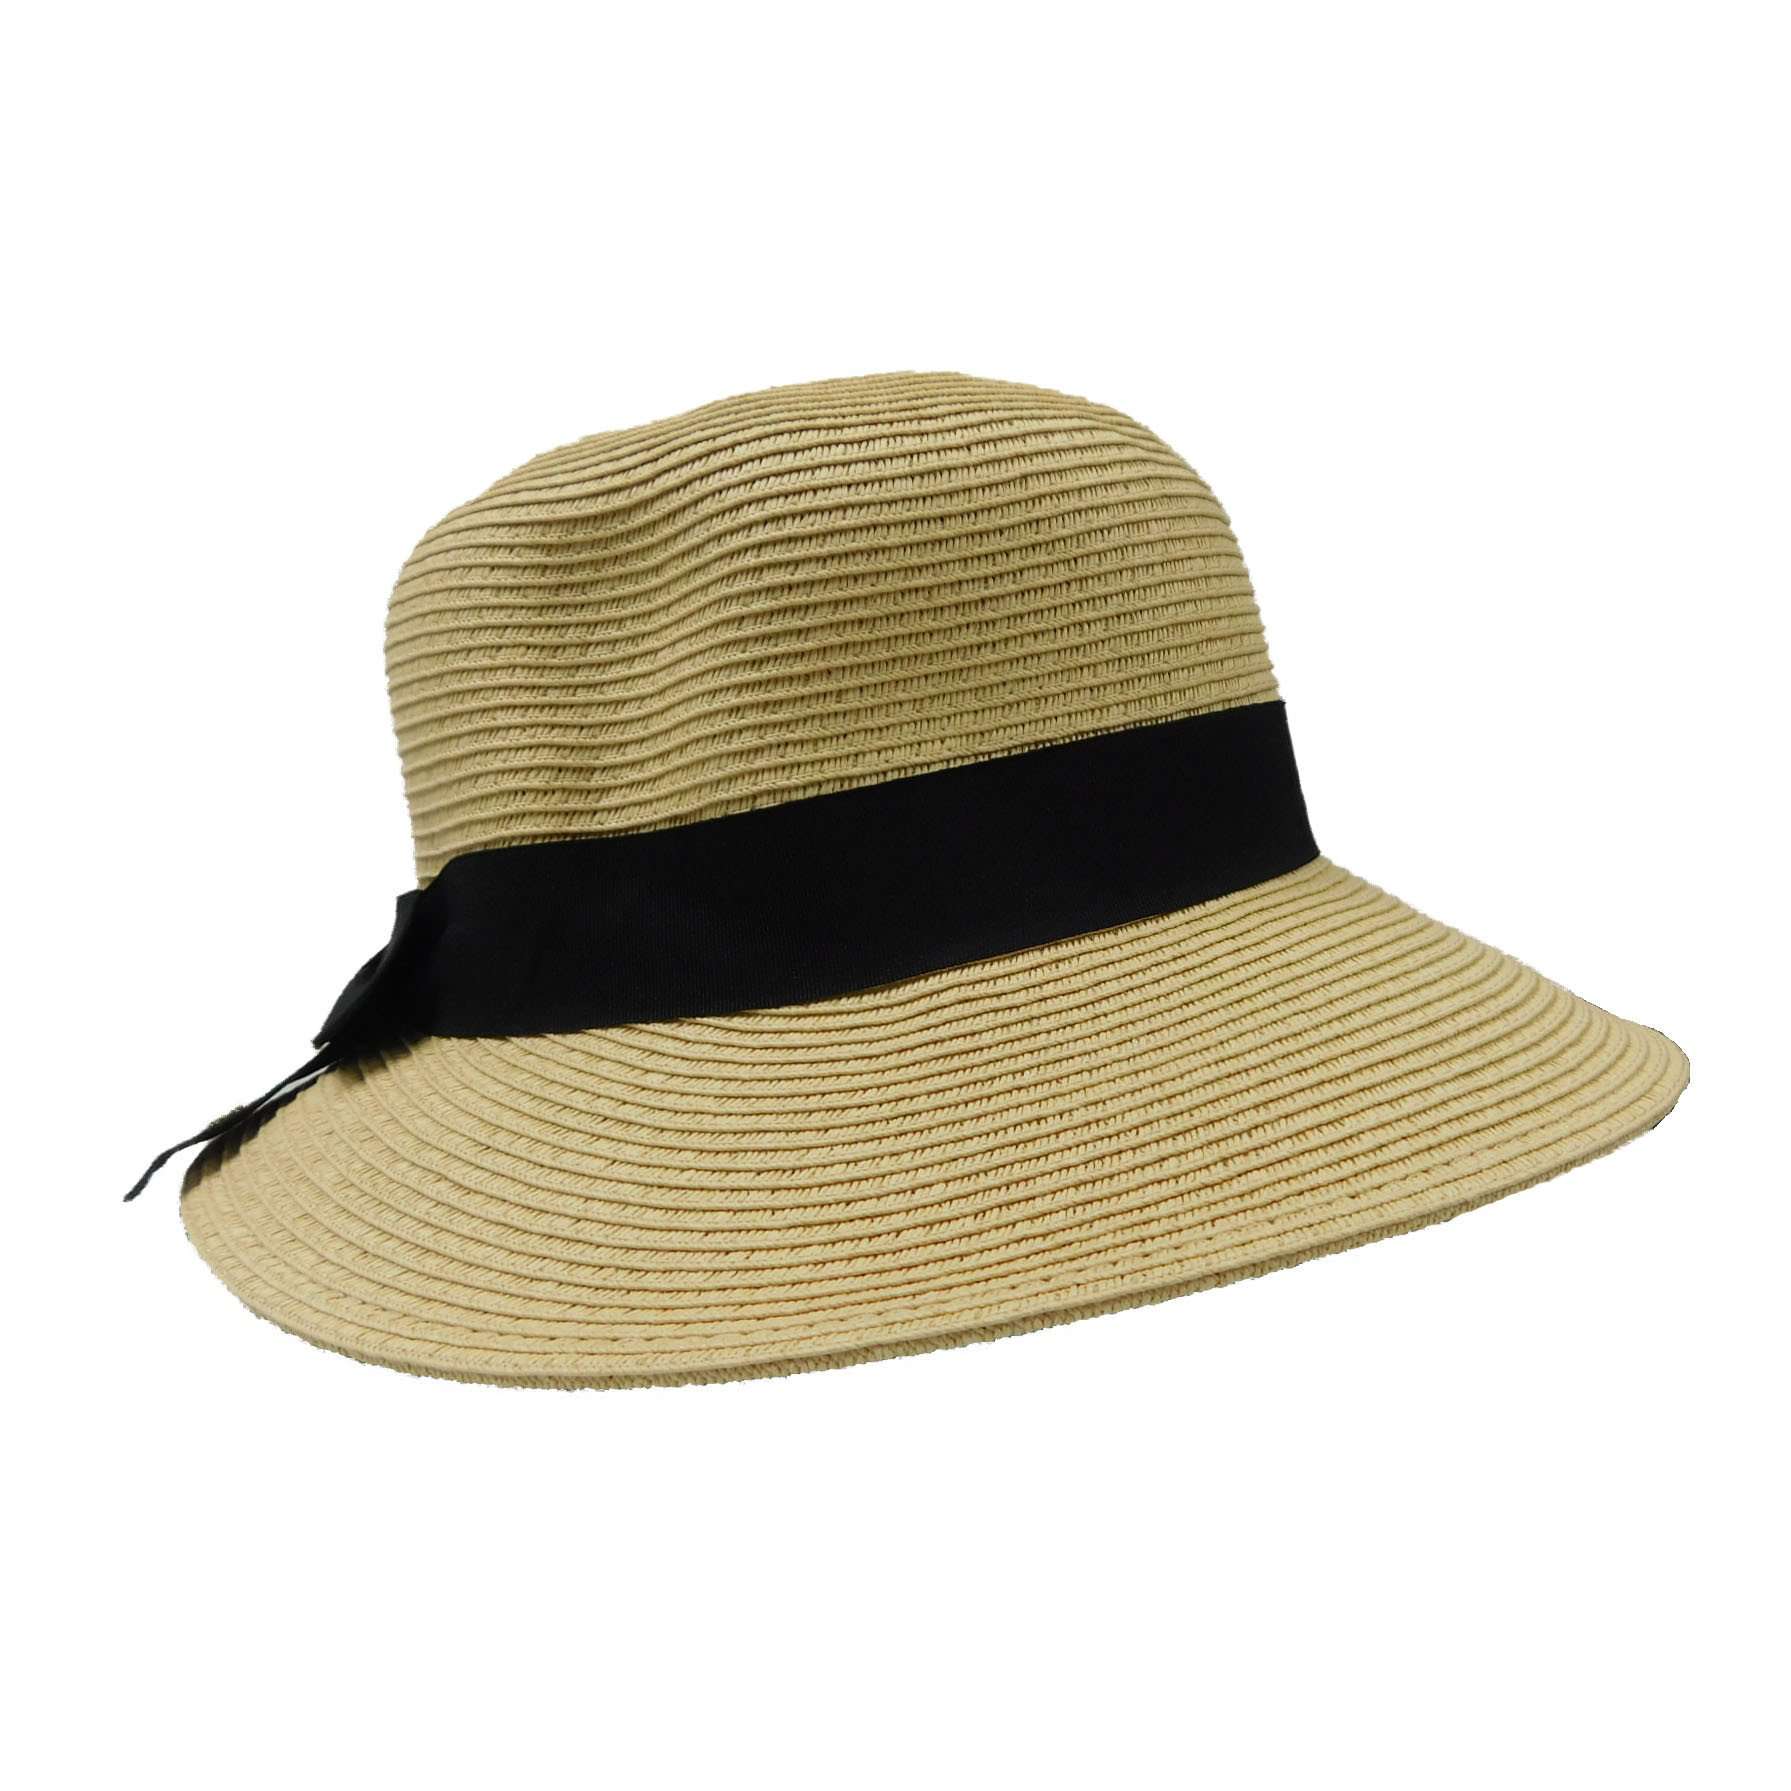 Asymmetrical Brim Summer Hat - Large and XL Size Women's Hats